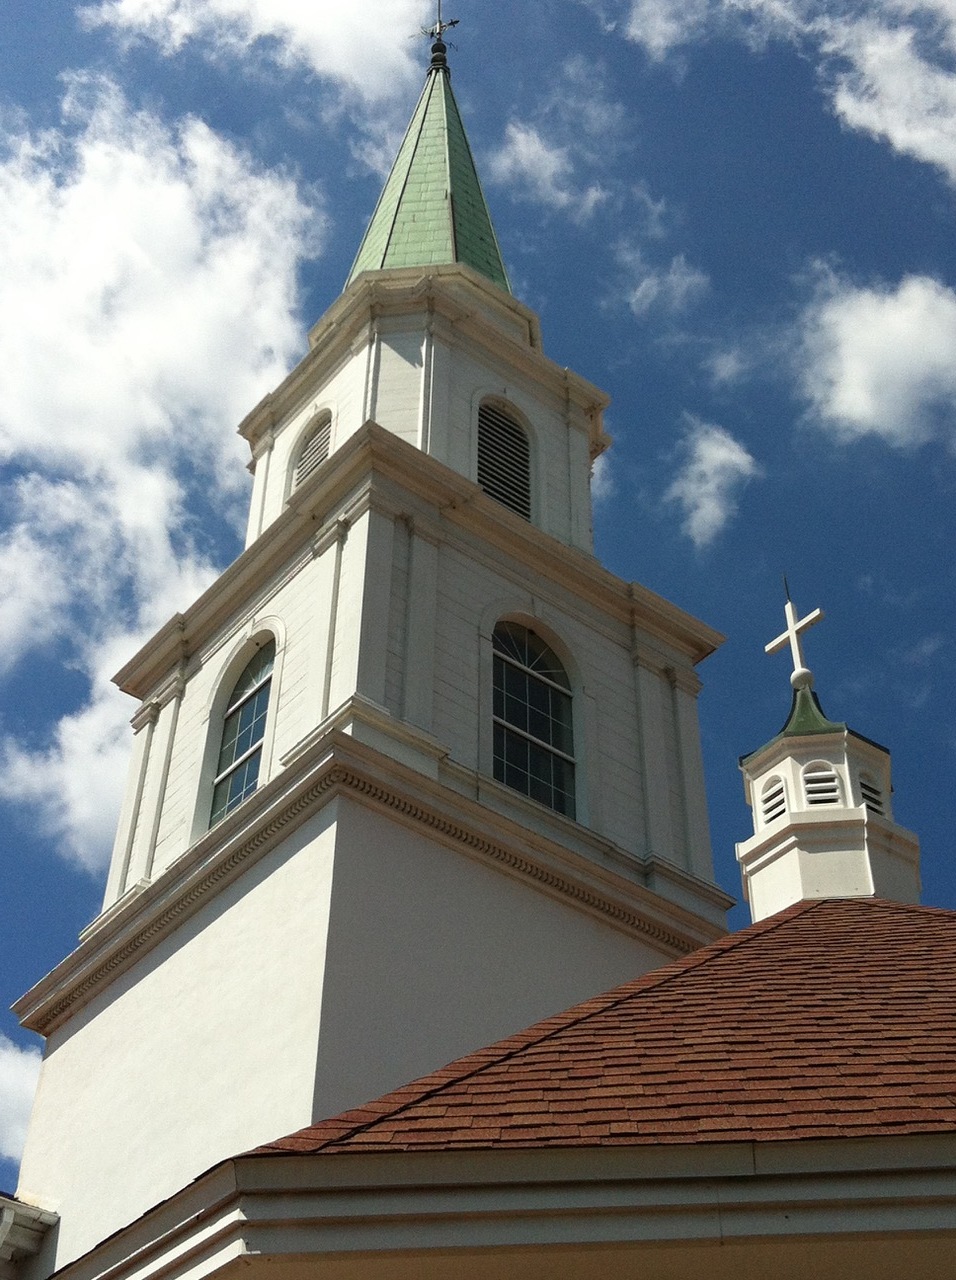 The church was founded in 1939 and its steeple was constructed in the 1950s.